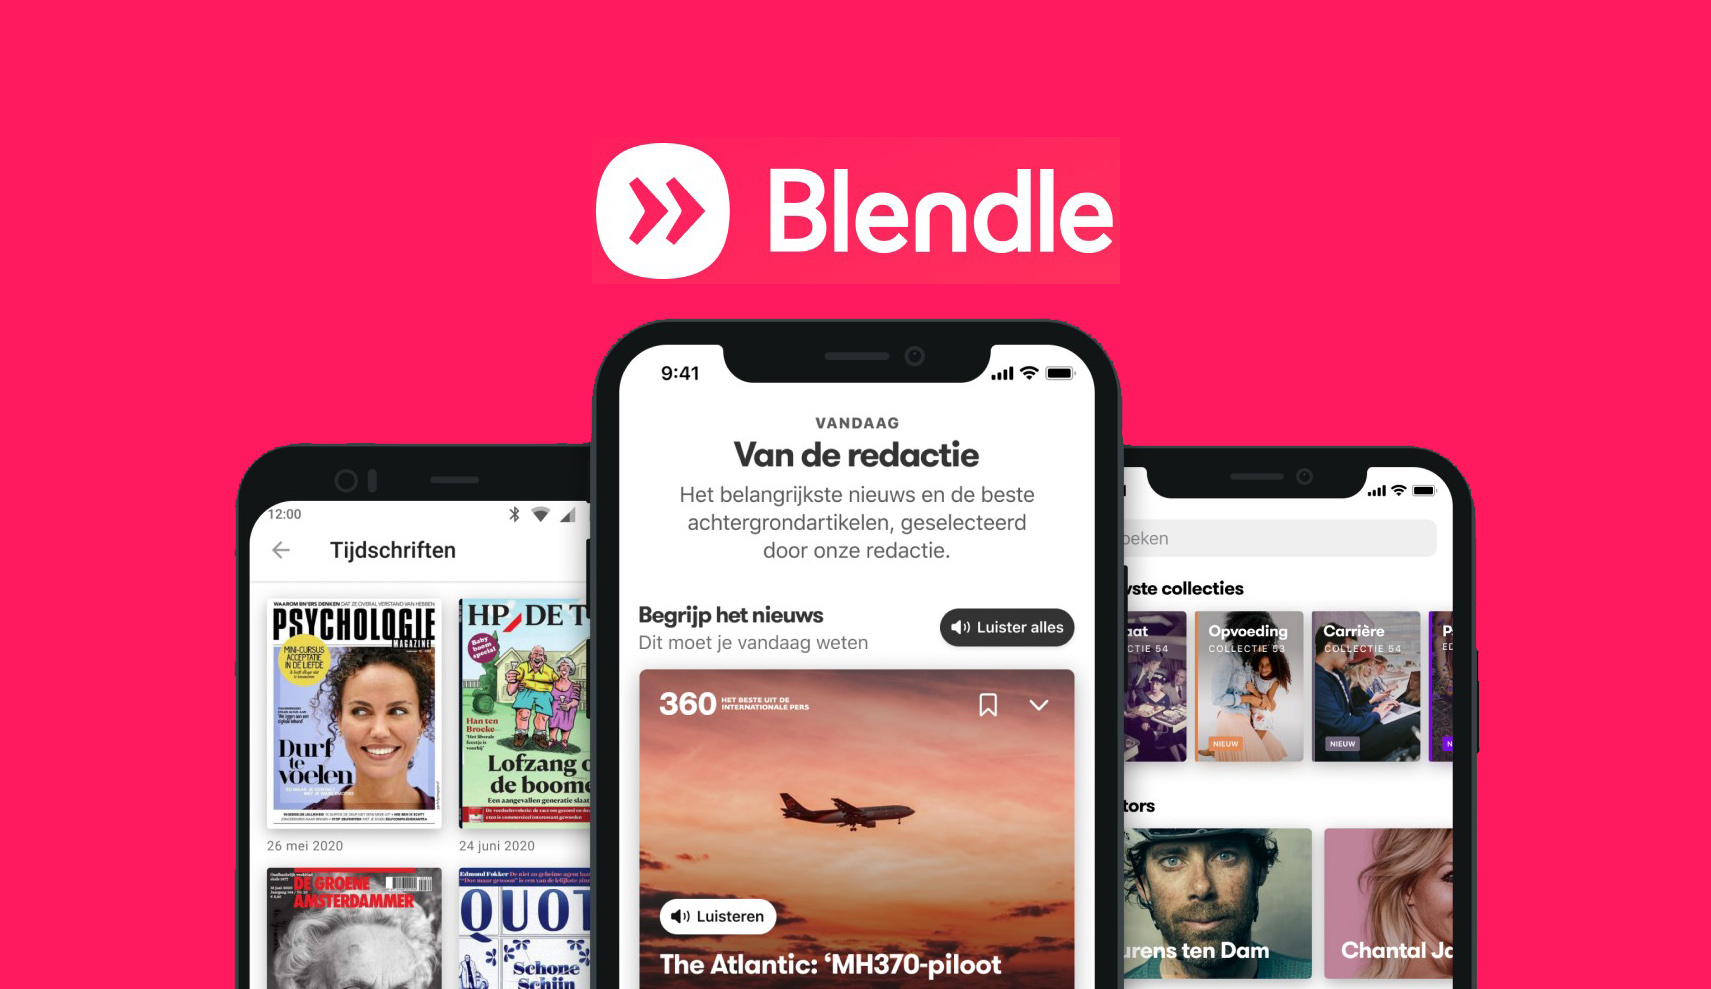 Blendle benefits from new Audio Ads campaign to present its product innovation